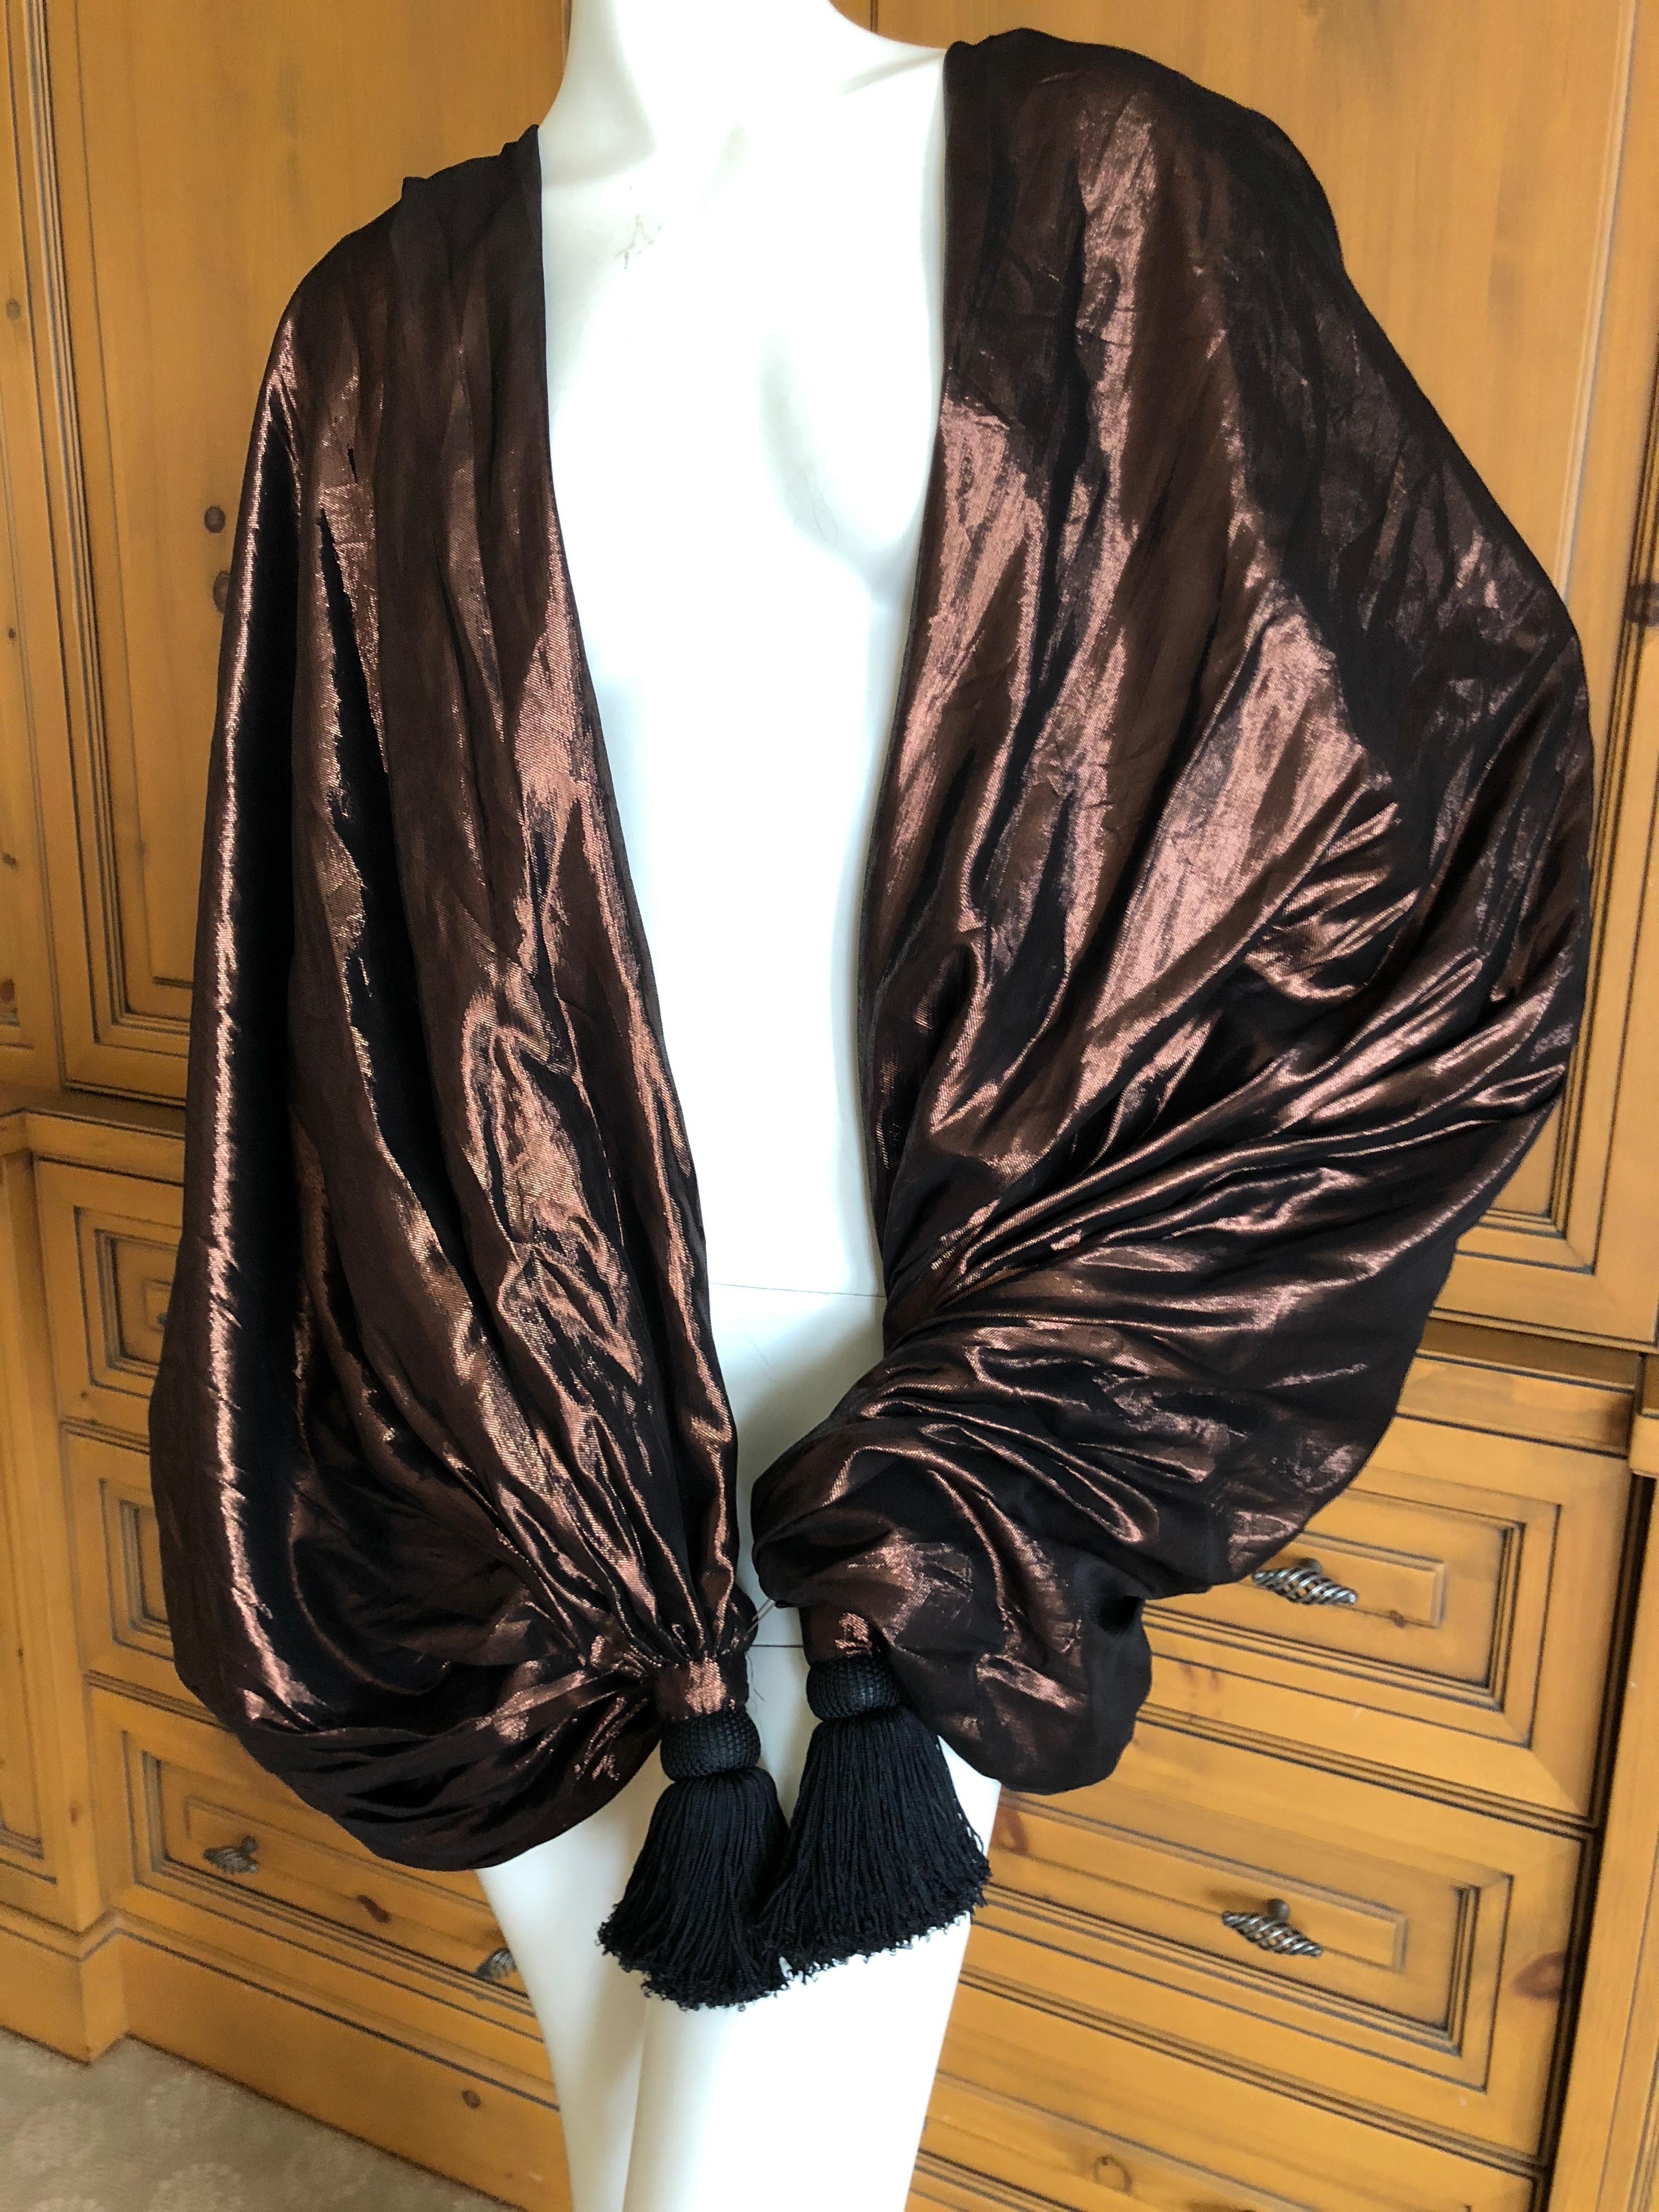 Cardinali Huge Bronze Stripe Silk Wrap Shawl with Tassels Fall 1973 In Excellent Condition For Sale In Cloverdale, CA